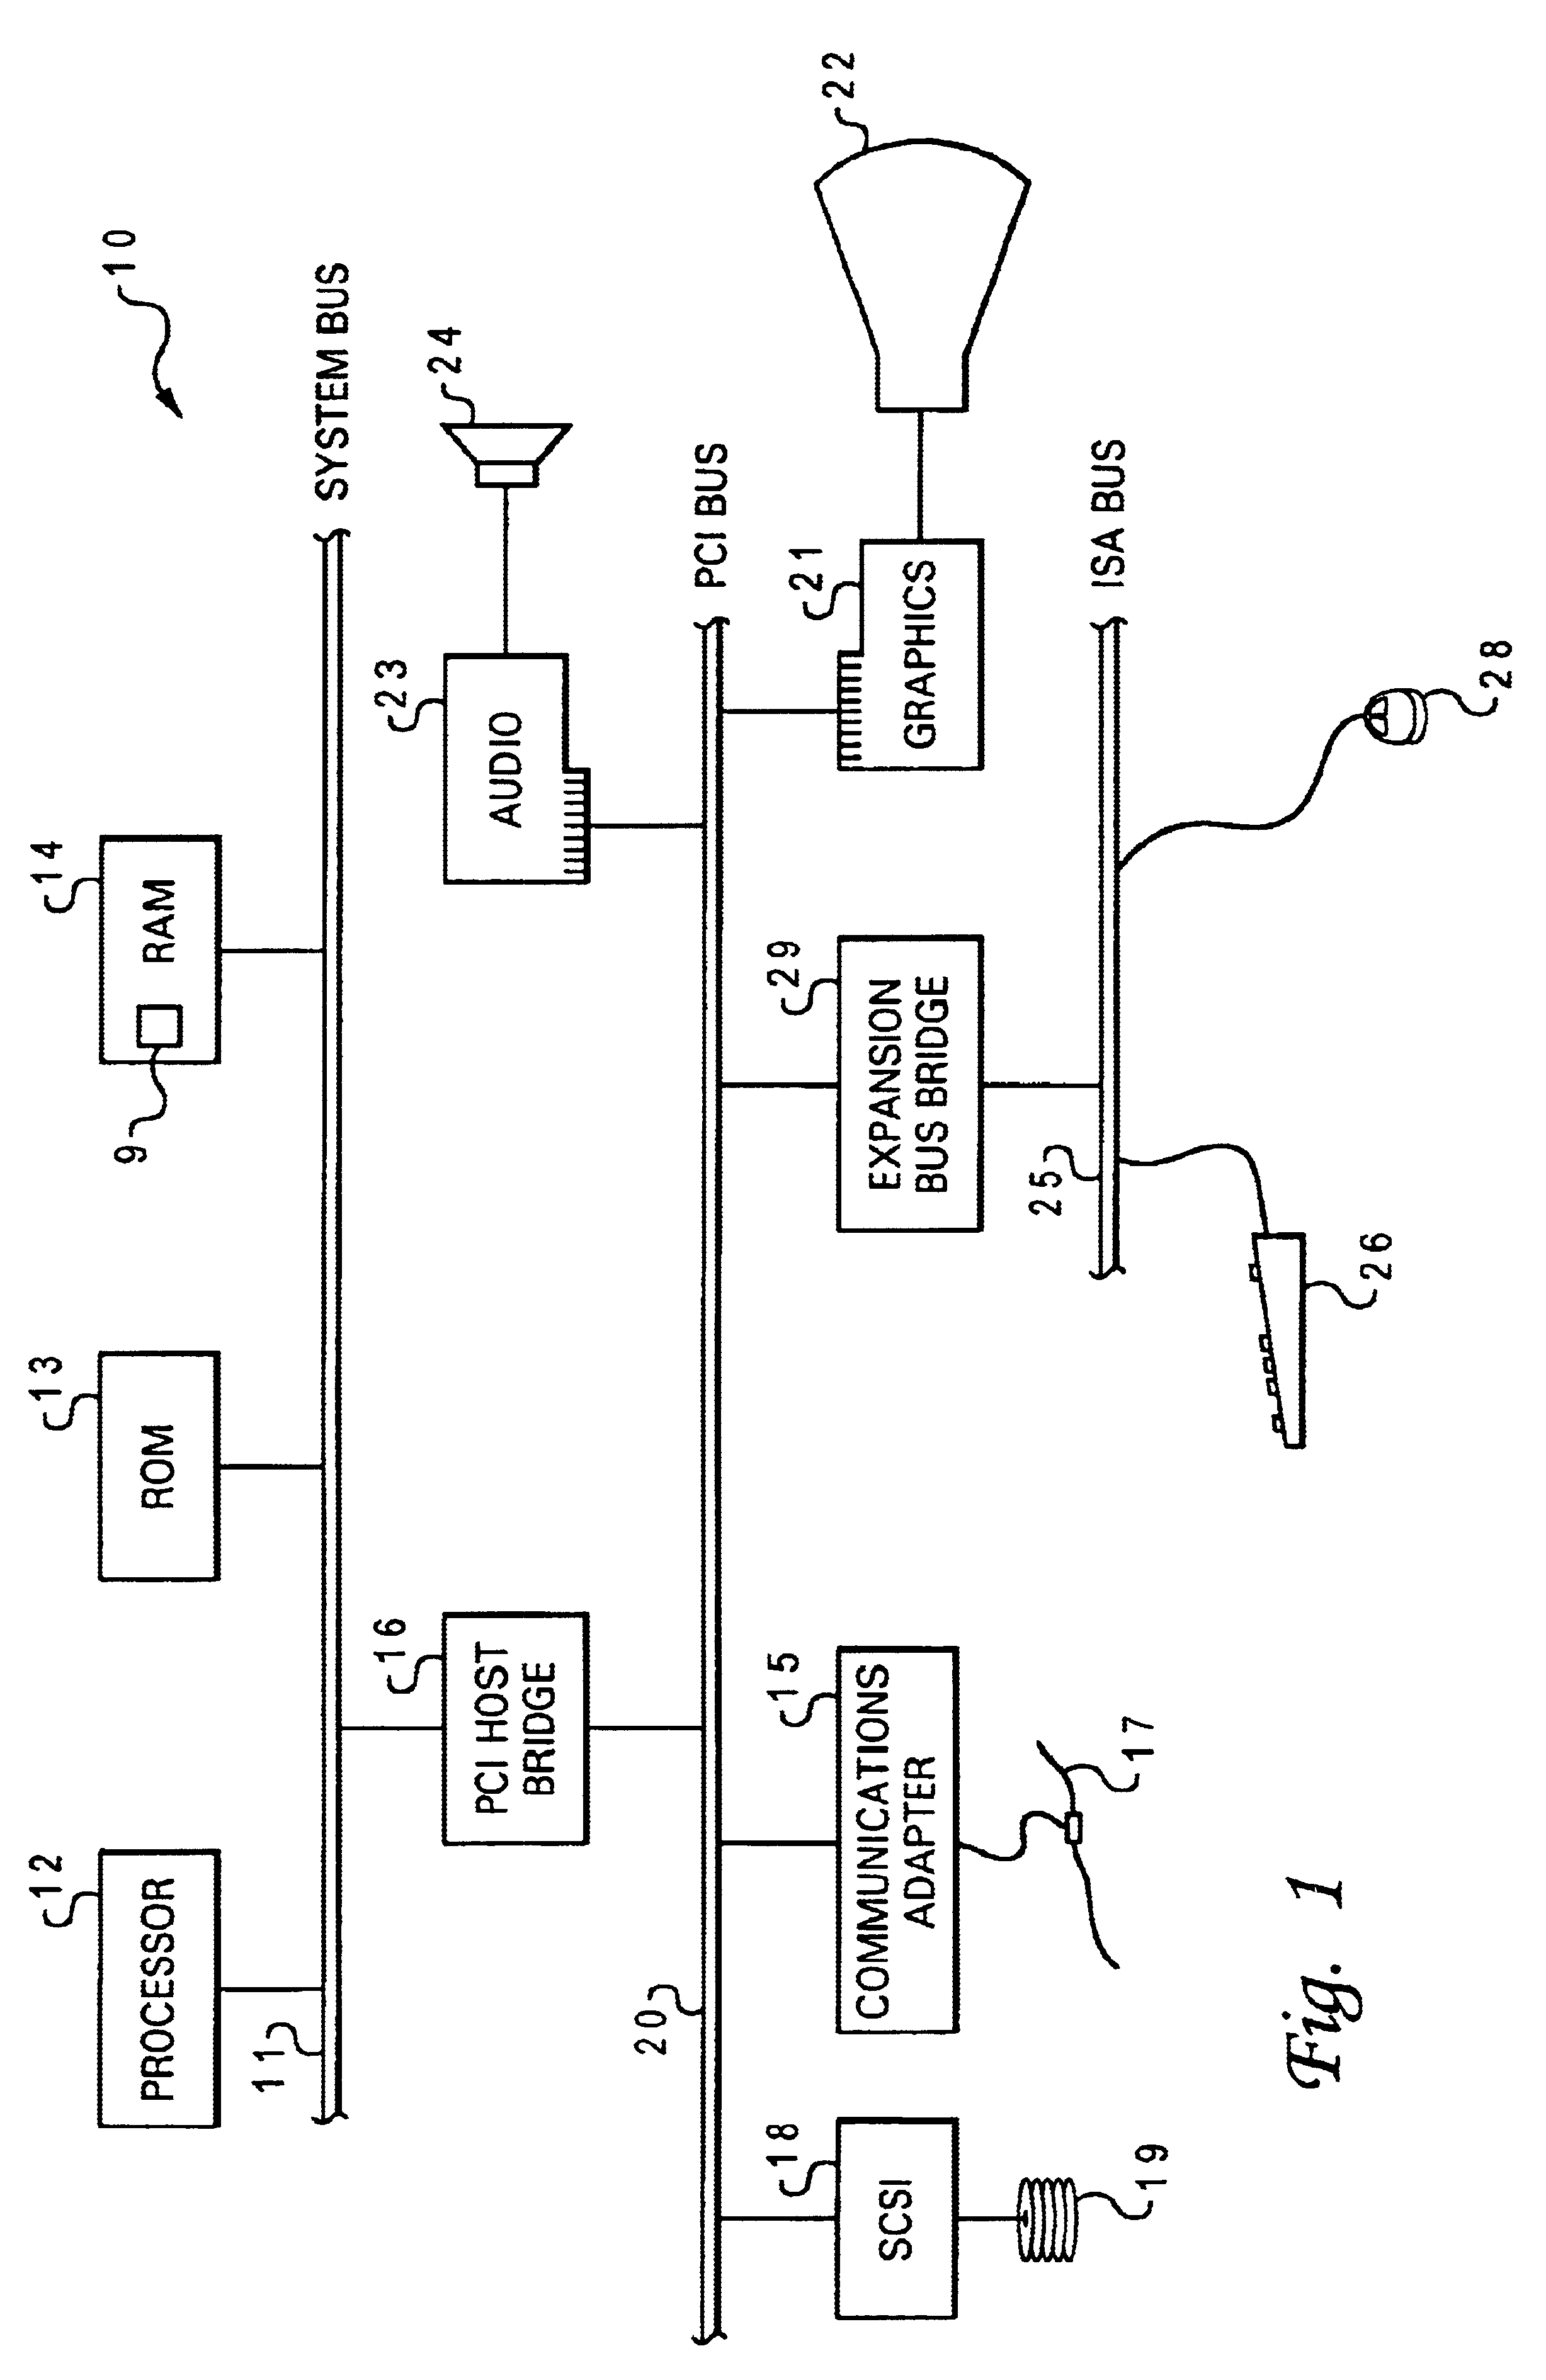 Method, system and program for specifying an electronic food menu on a data processing system